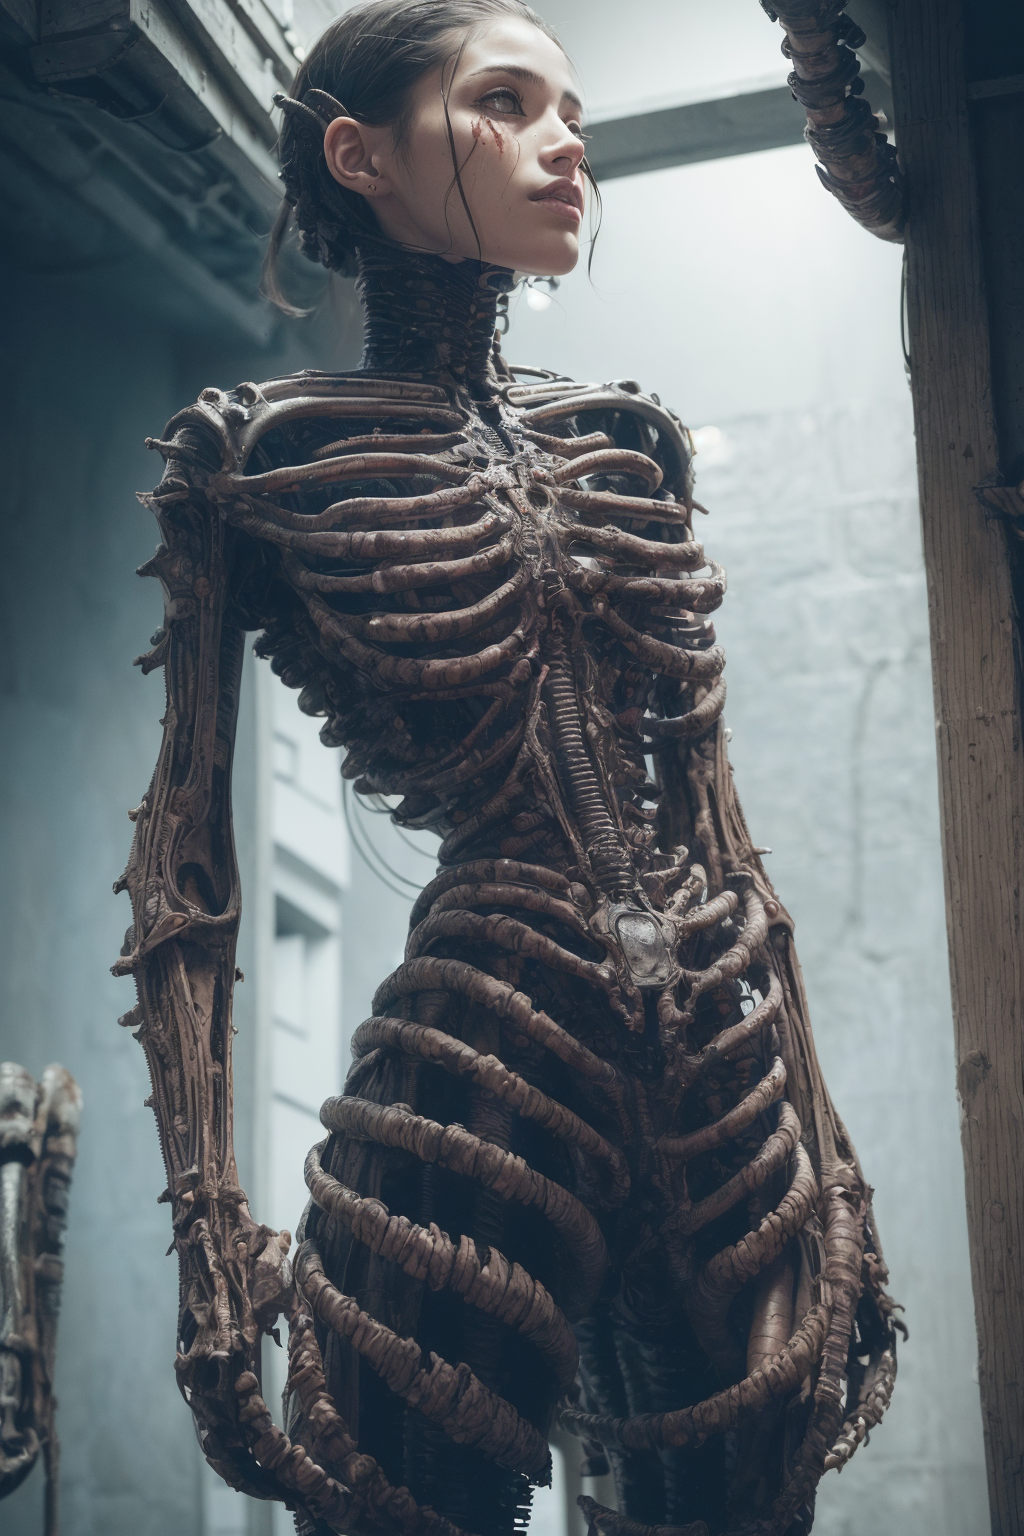 A Skeleton in a Dress with Wires Attached to It.